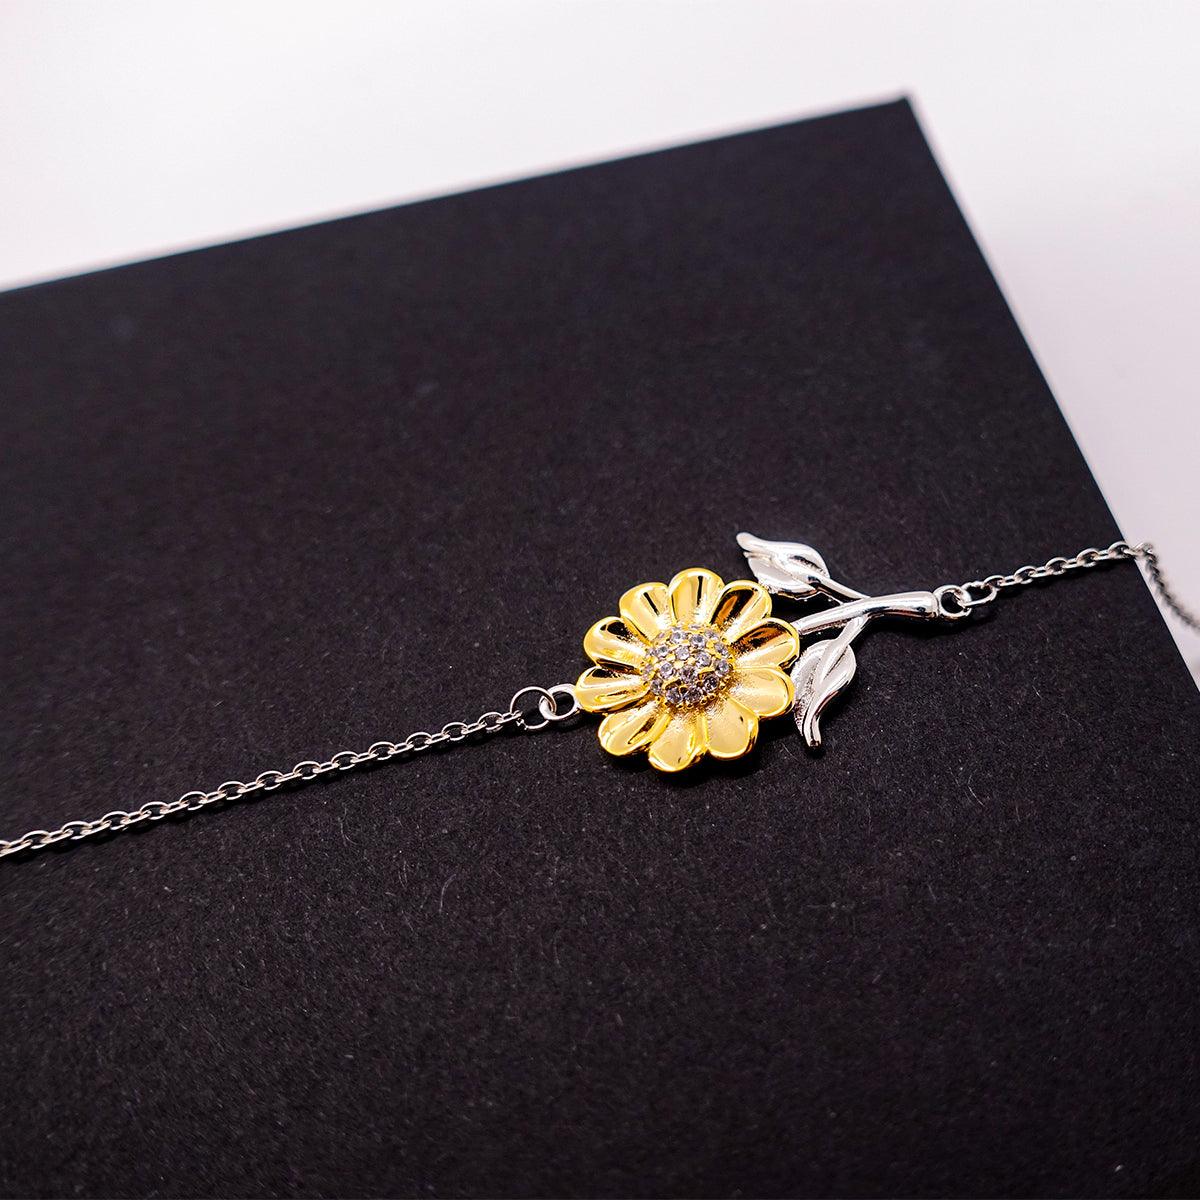 Remarkable Model Gifts, Your dedication and hard work, Inspirational Birthday Christmas Unique Sunflower Bracelet For Model, Coworkers, Men, Women, Friends - Mallard Moon Gift Shop